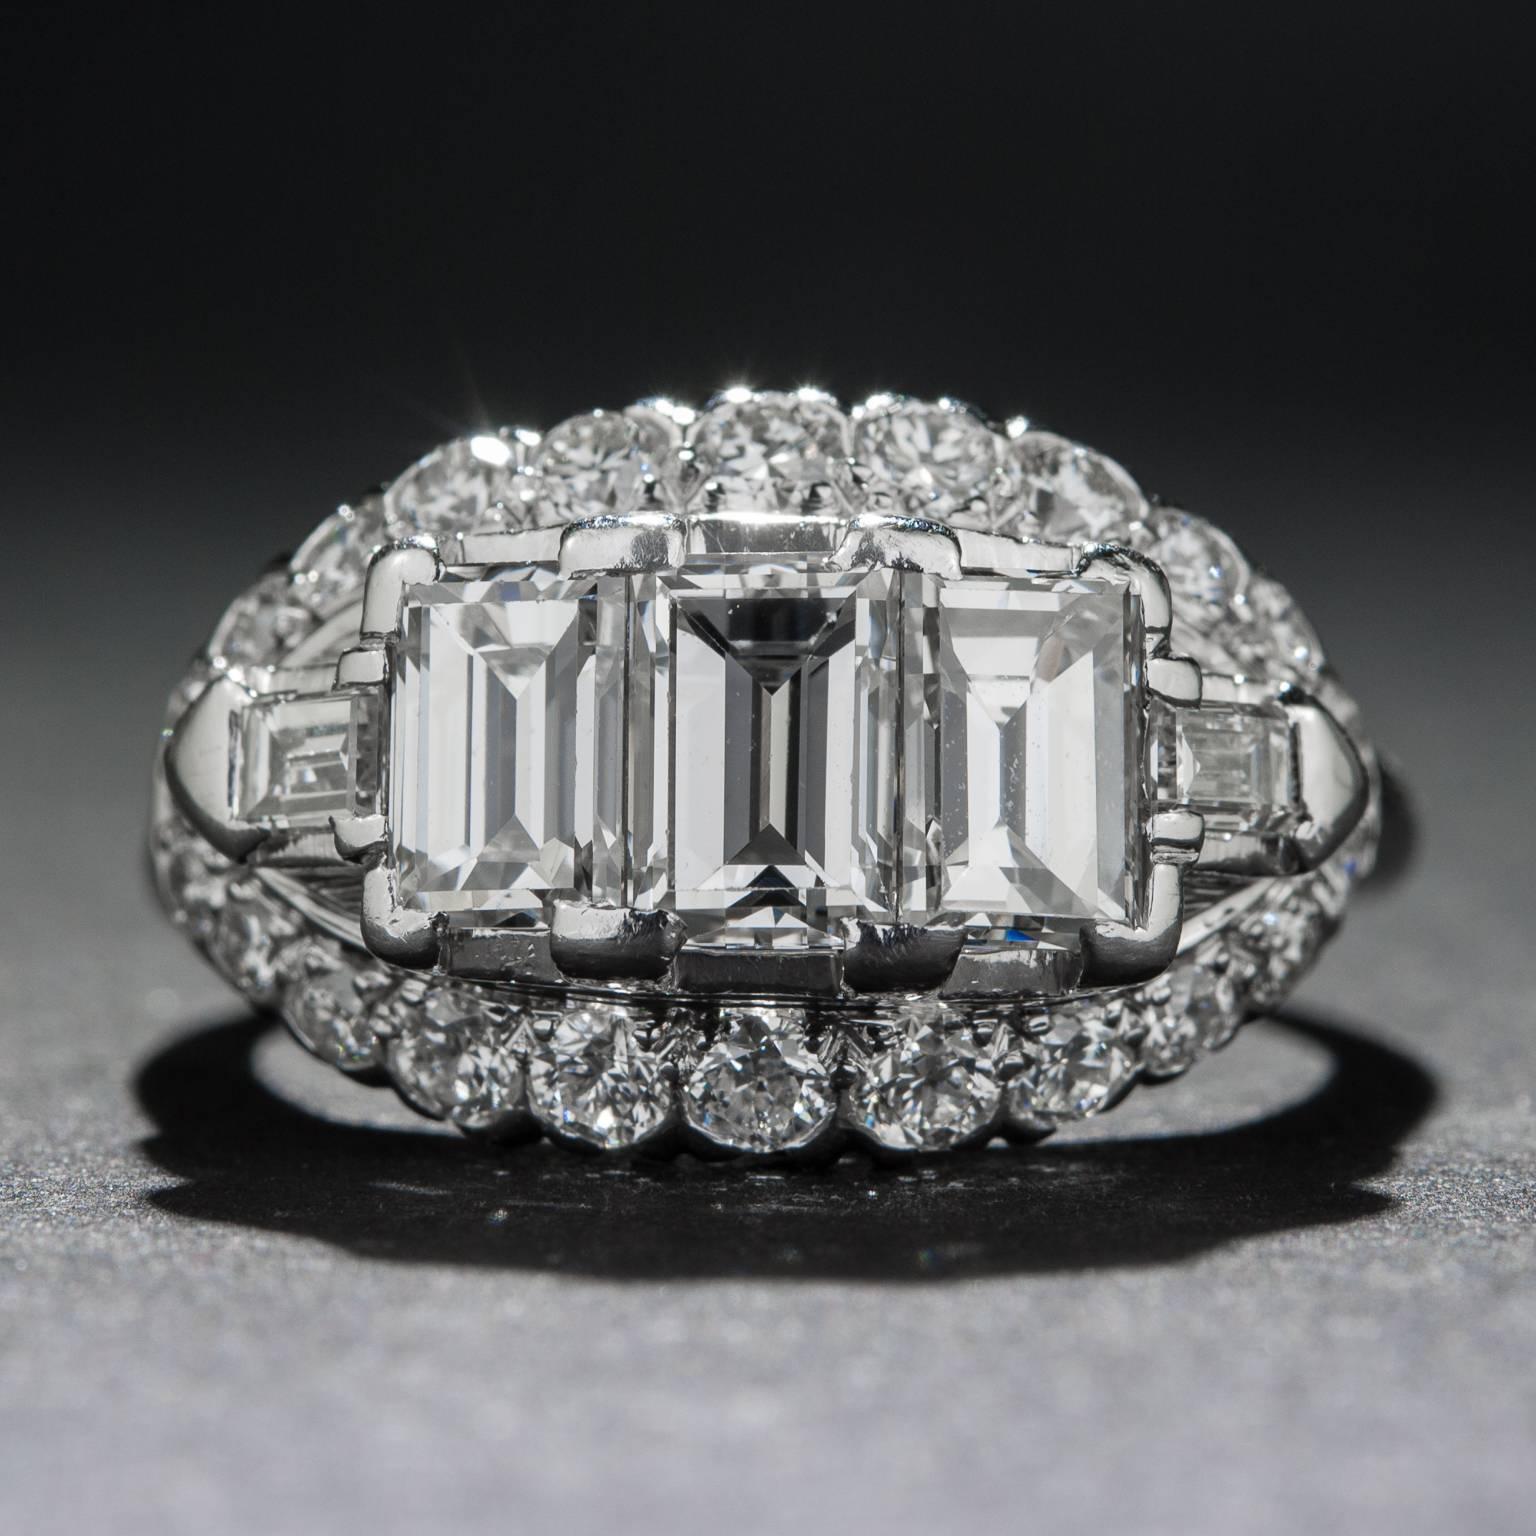 1930s Diamond Platinum Ring In Excellent Condition For Sale In Carmel, CA